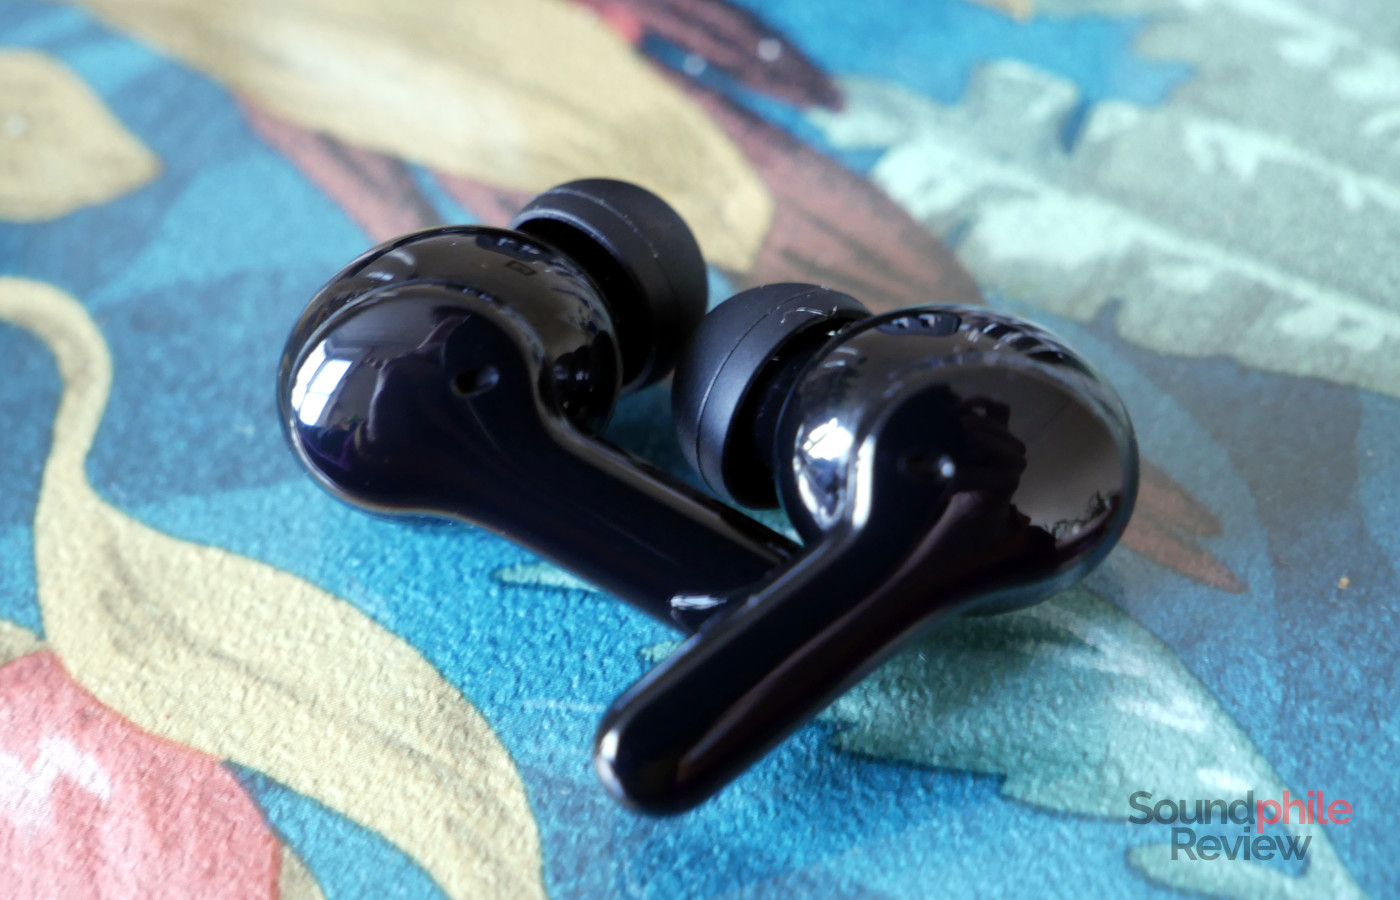 QCY T13 ANC Review - A Budget-Friendly Earbud with ANC - DailytechArena